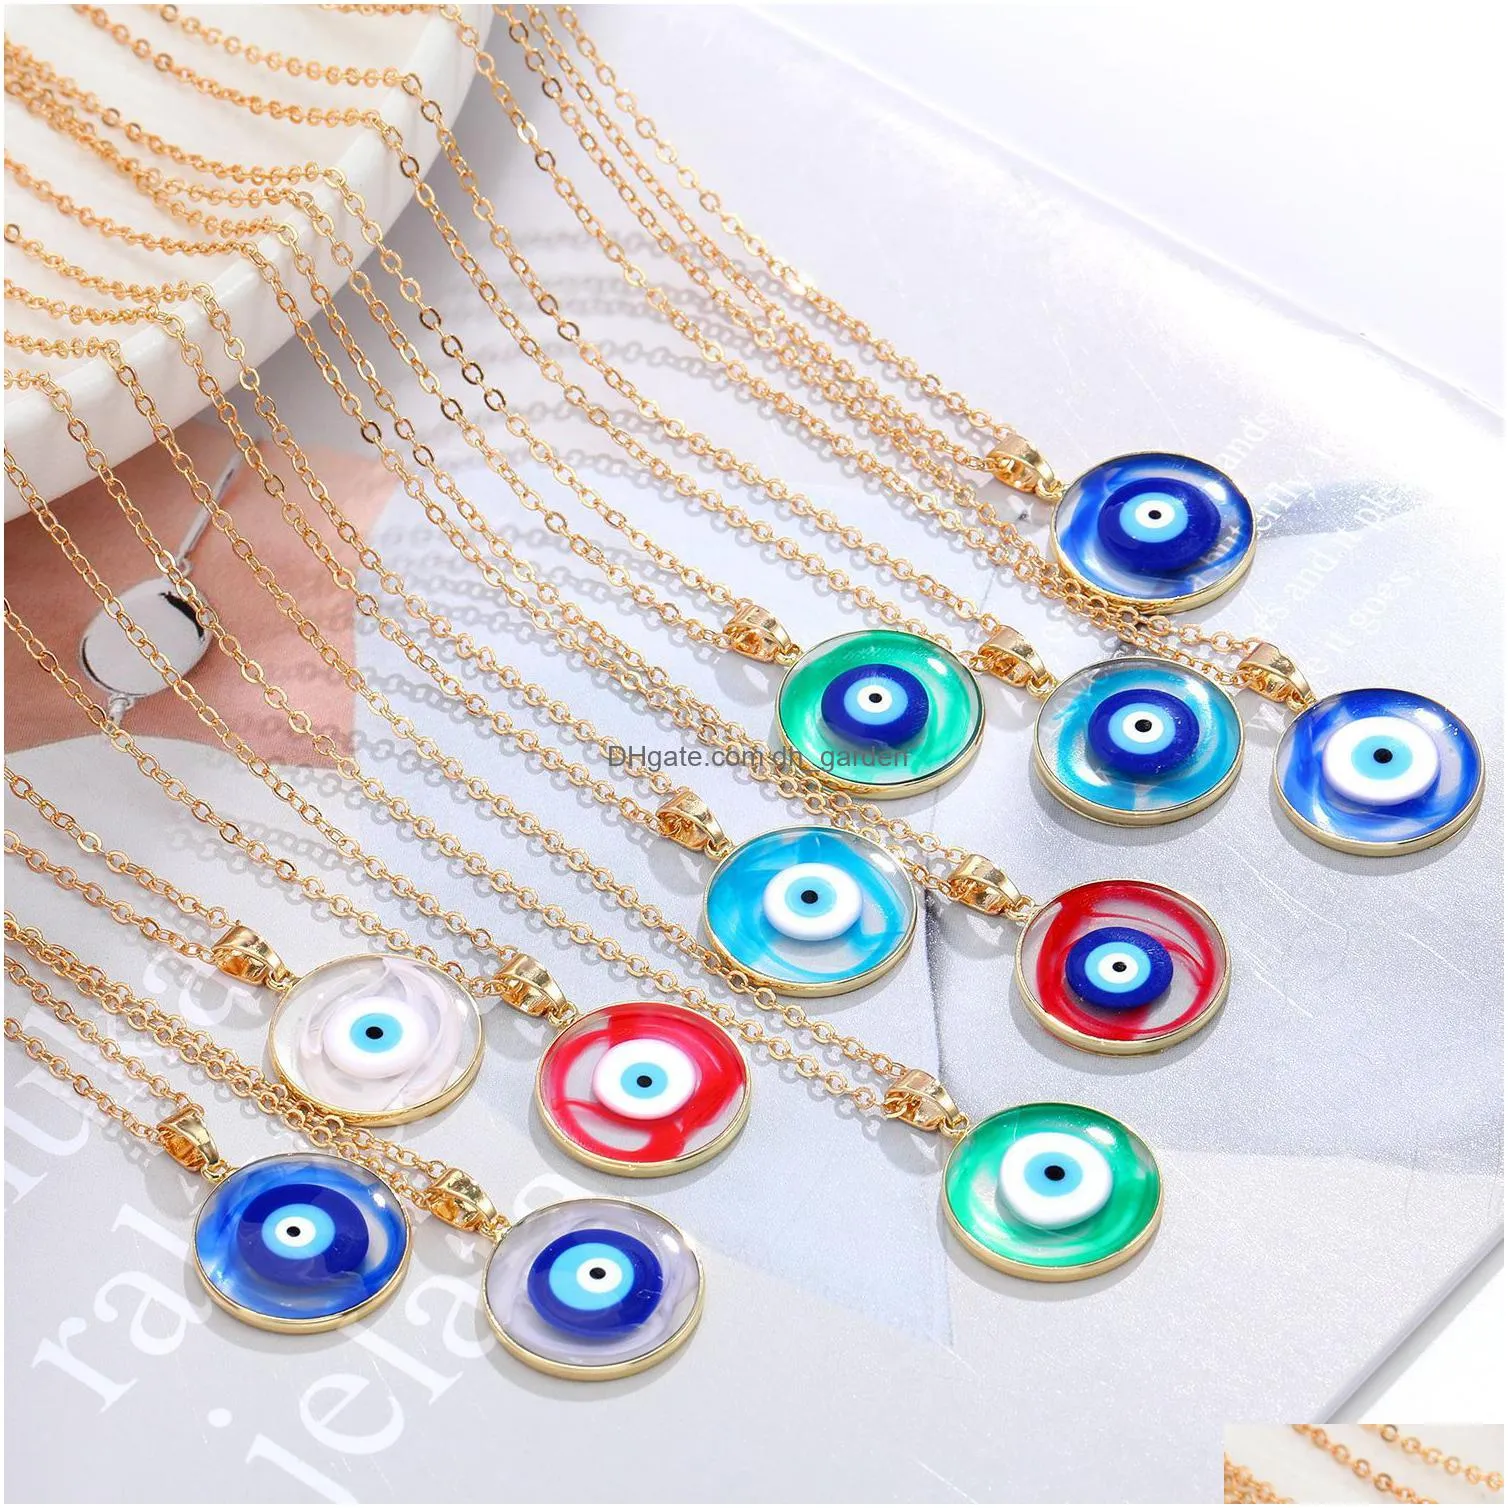 blooming colorful turkish blue evil eye necklace for women new trendy lucky eye clavicle chain choker wedding jewelry